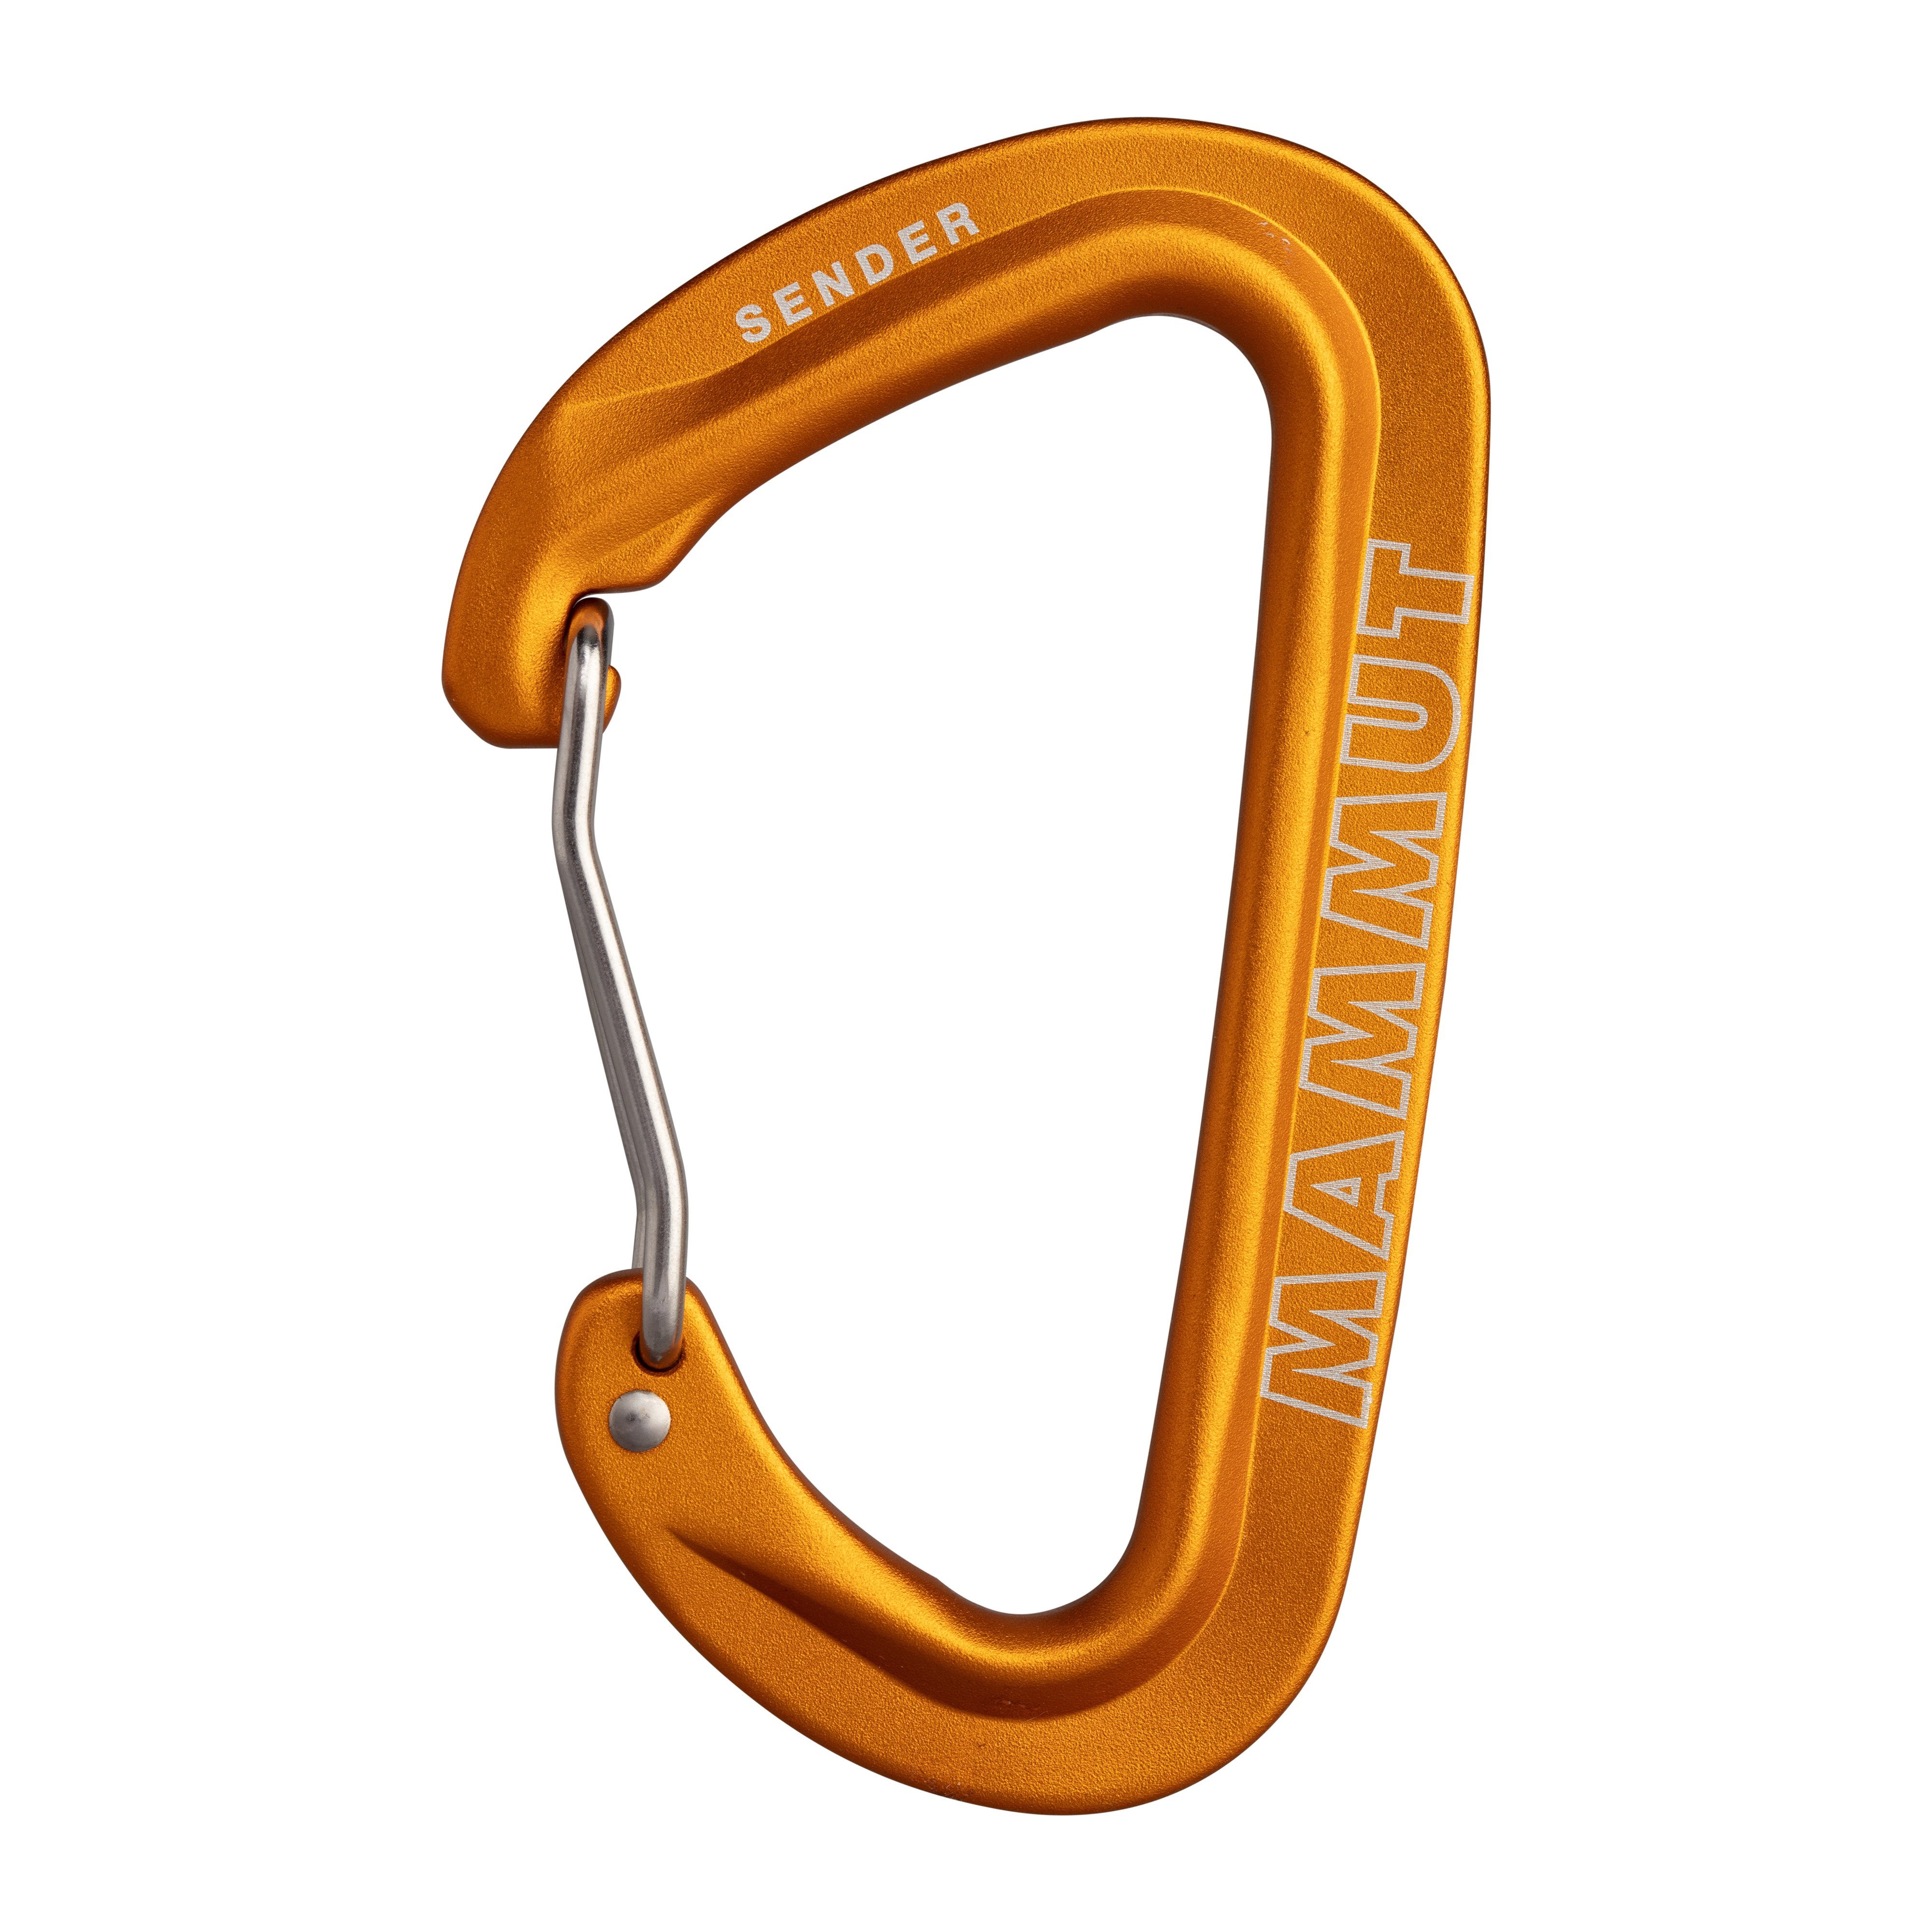 Sender Wire Carabiner - one size thumbnail